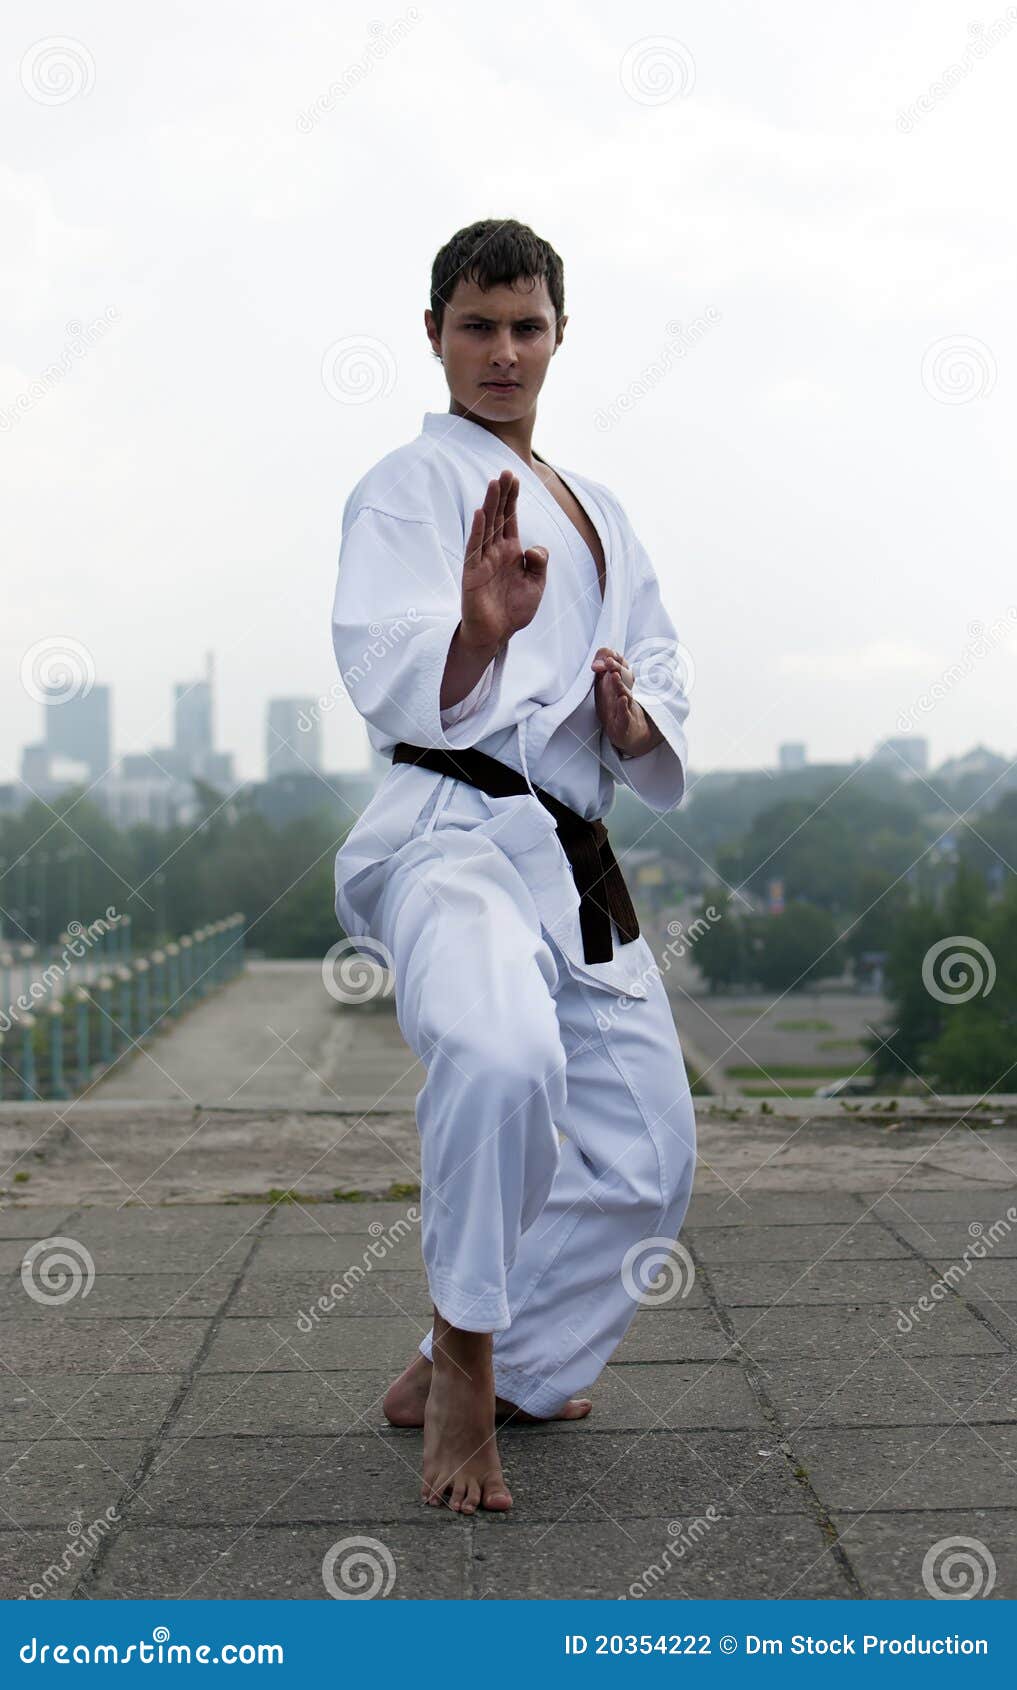 14 Basic Karate Stances Help You Build a Strong Base